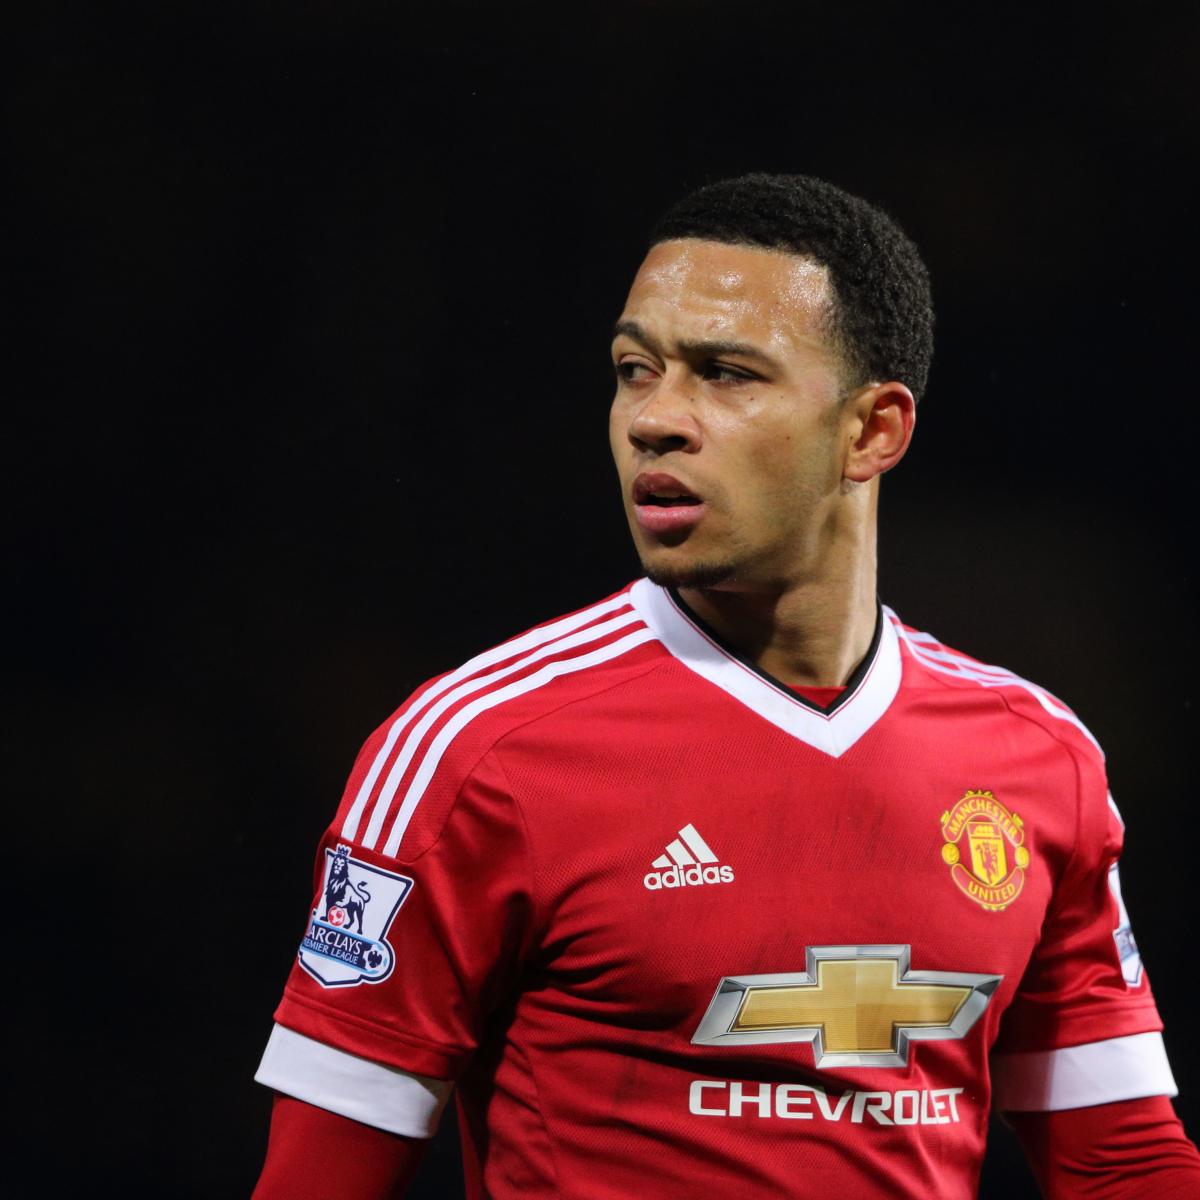 Memphis Depay - Hate it or Love it I'm not going to